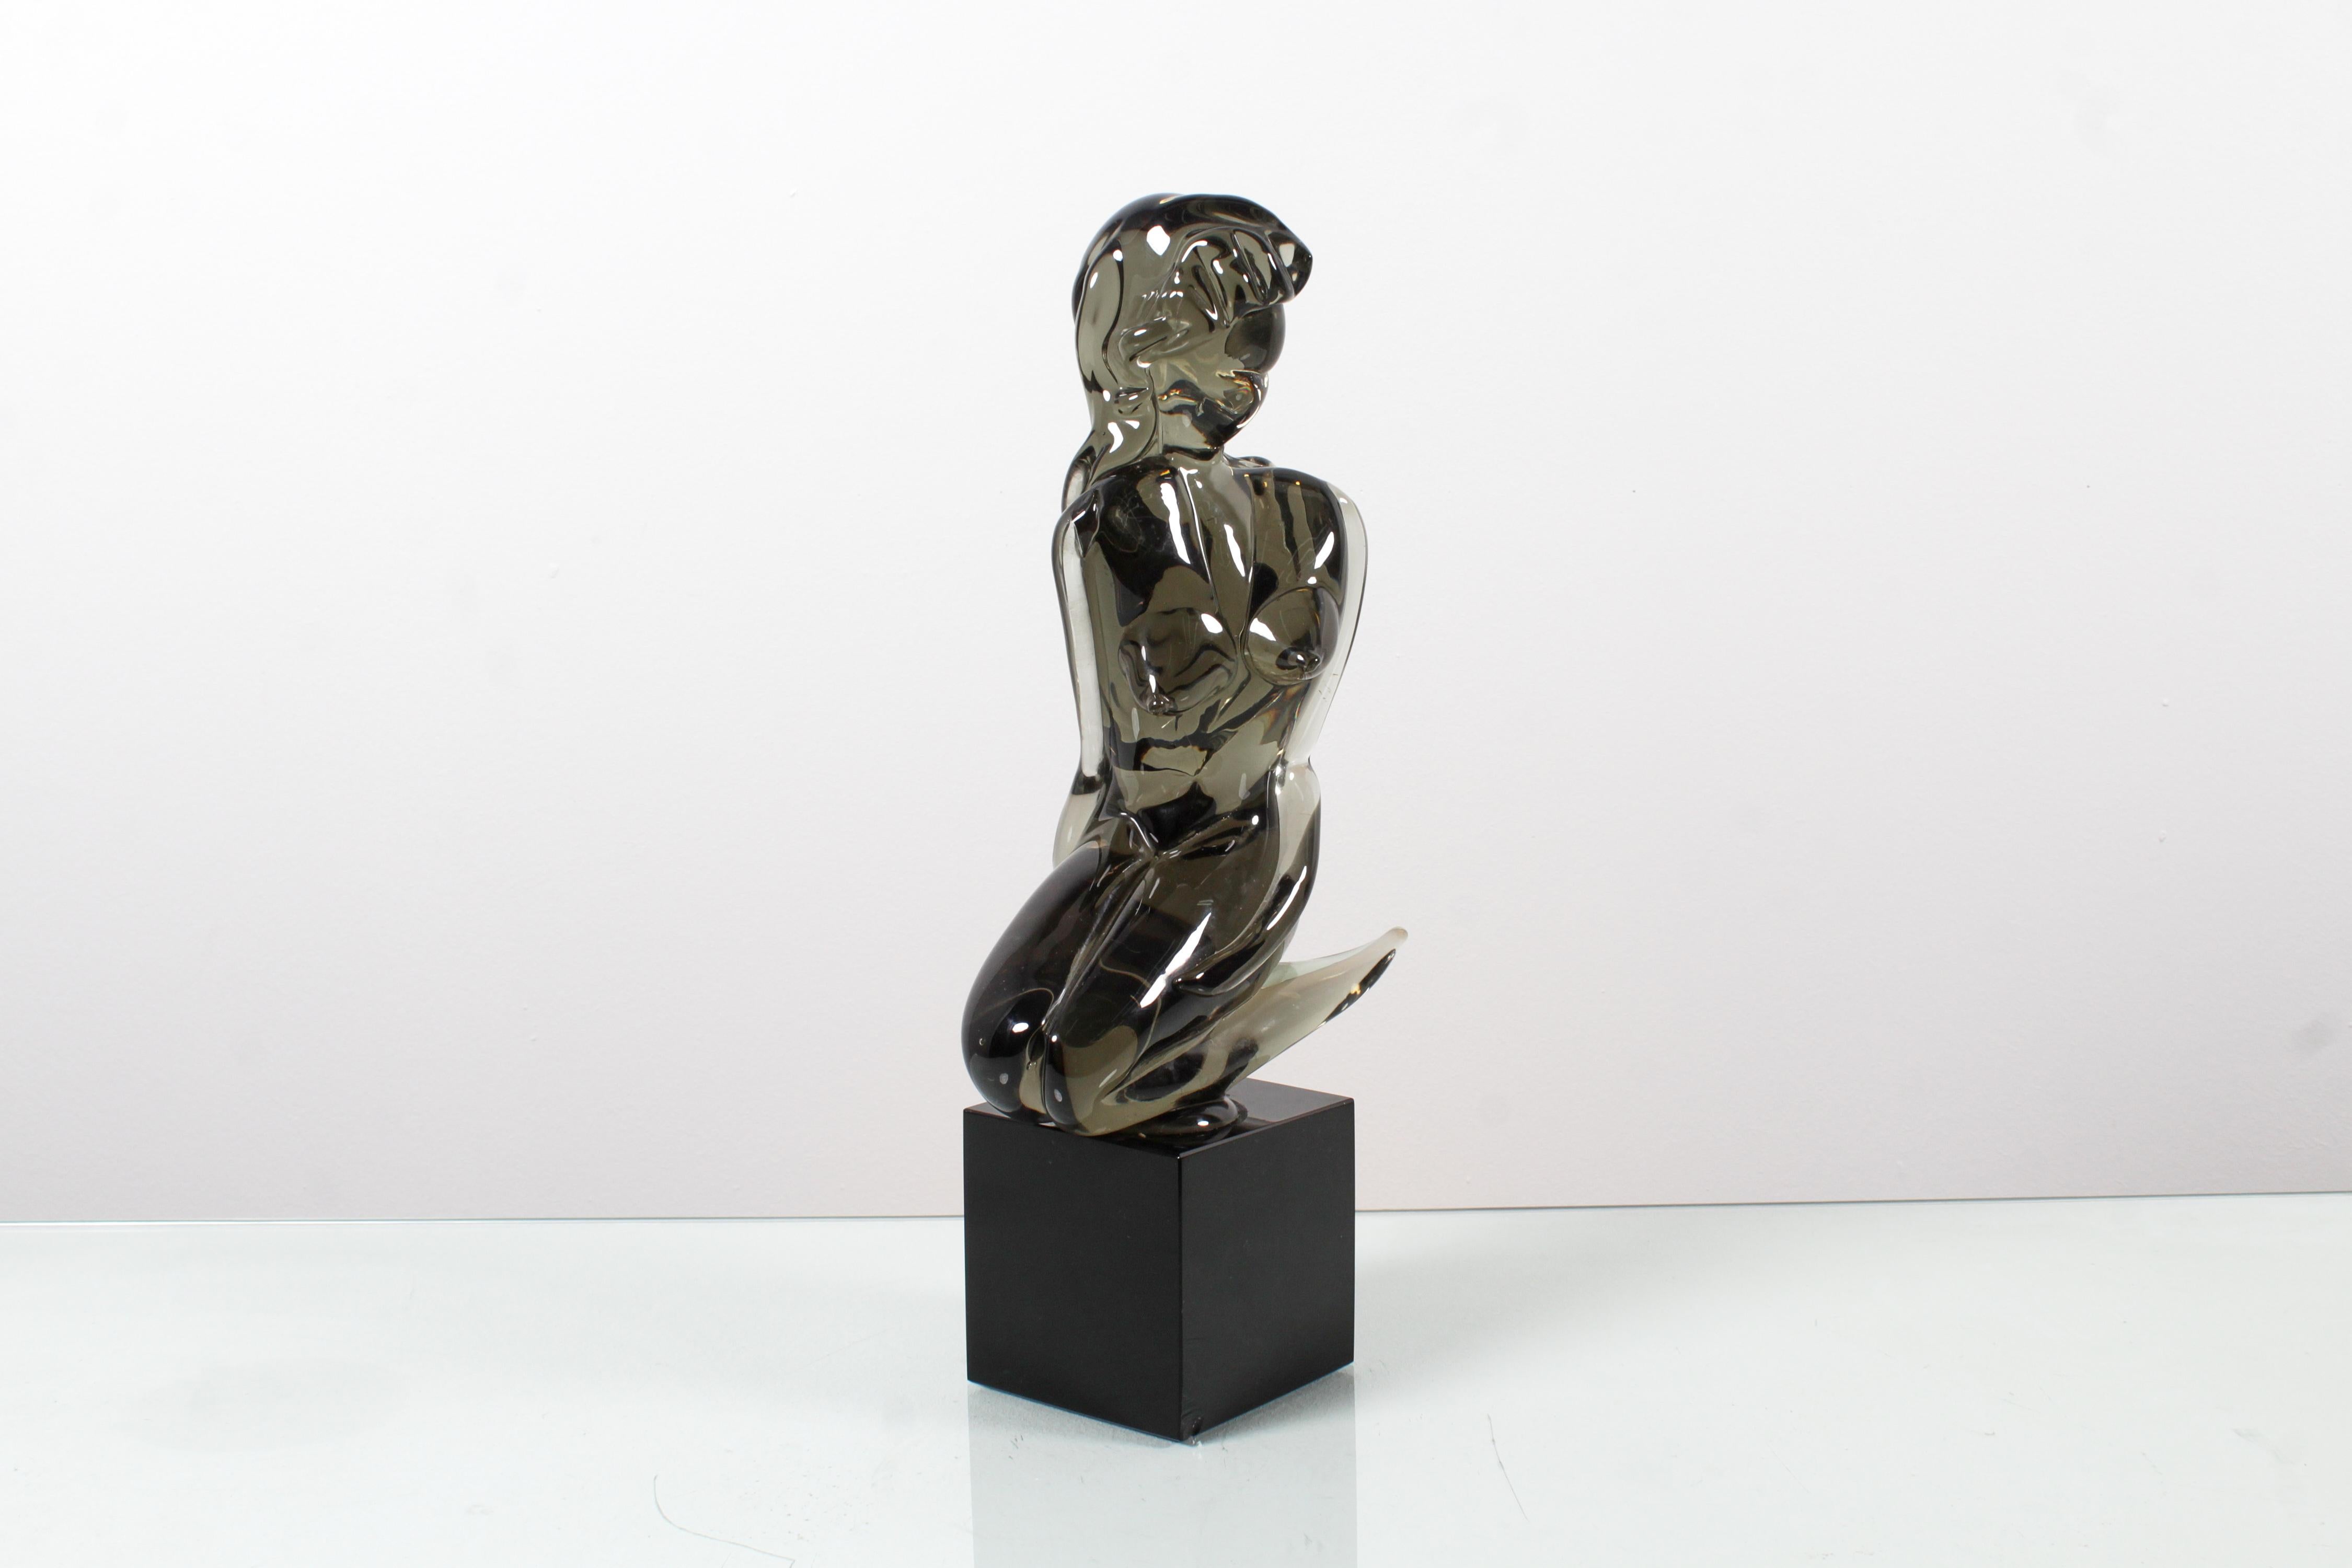 Delightful sculpture depicting a stylized woman's body in smoky green Murano glass on a cubic black glass pedestal. The artwork, created in the 1970s, can be attributed to the Murano master Loredano Rosin (1936-1991).